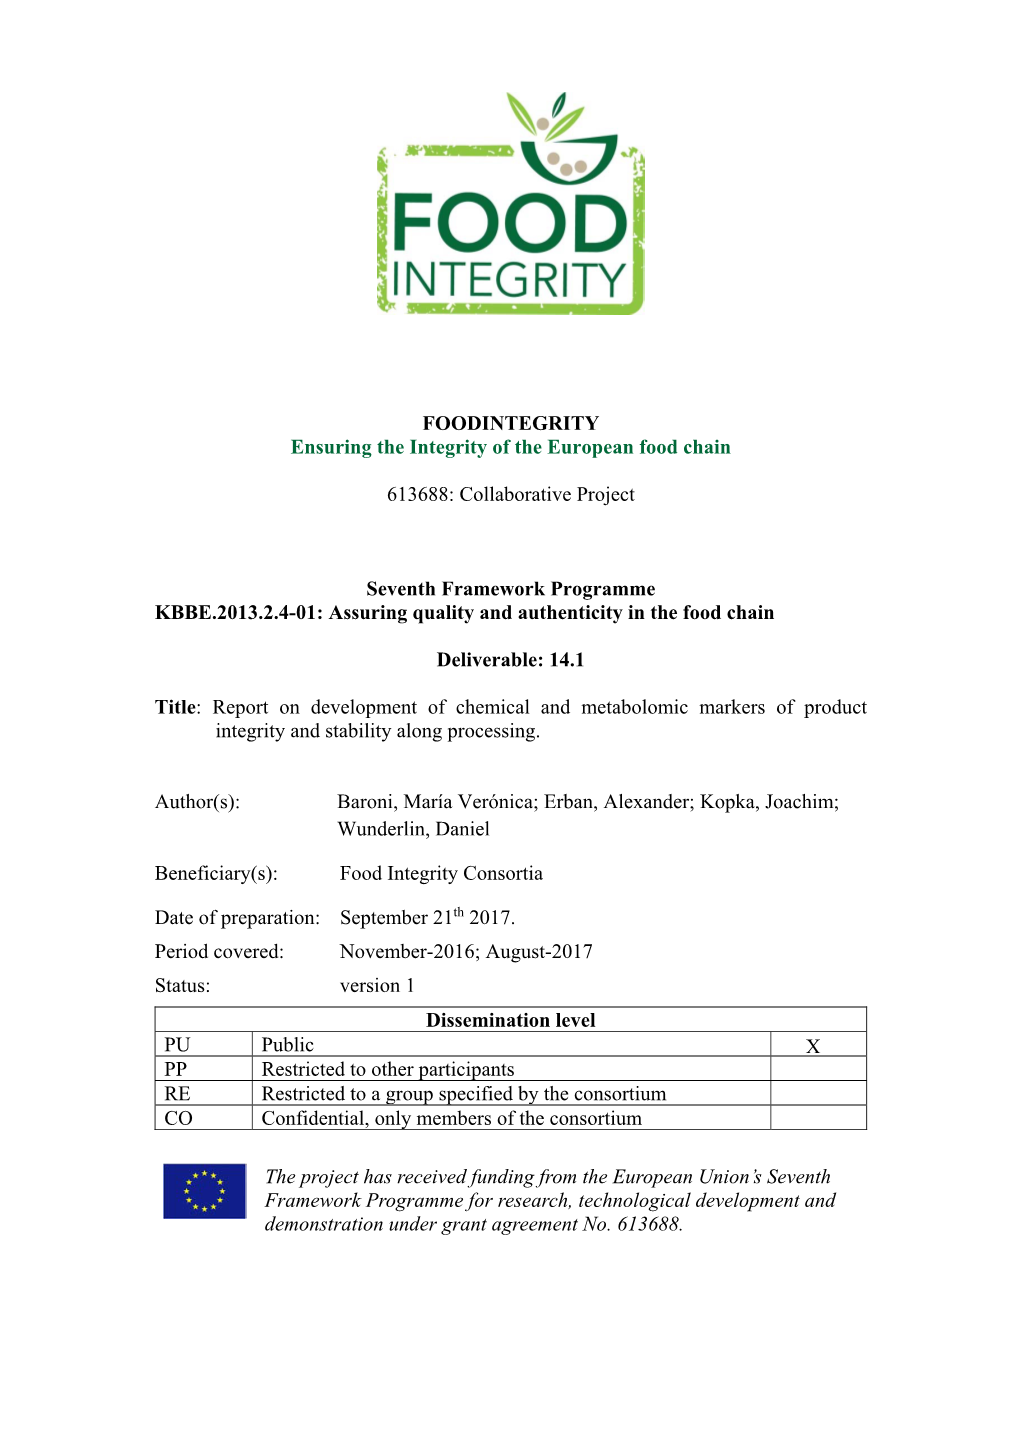 FOODINTEGRITY Ensuring the Integrity of the European Food Chain